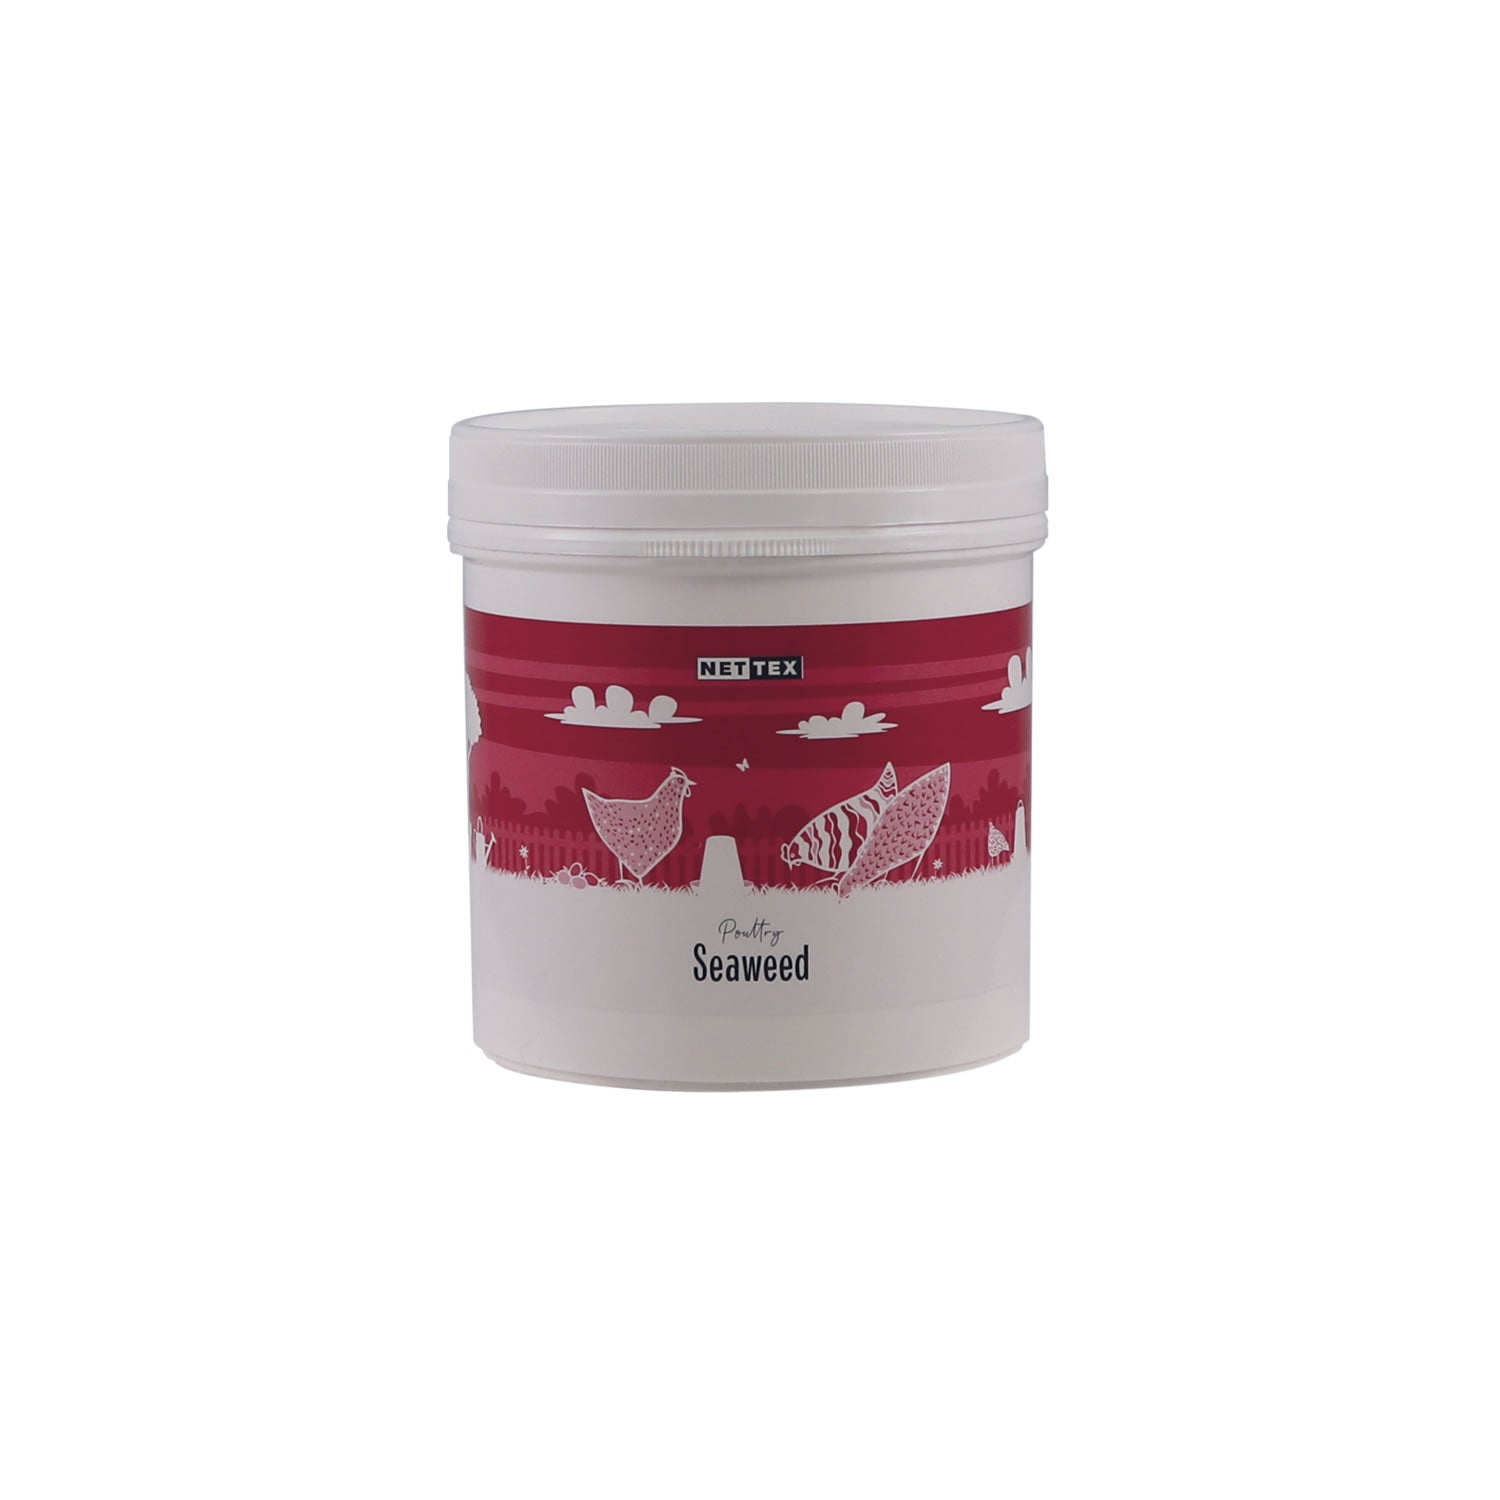 Nettex Poultry Seaweed 400gm